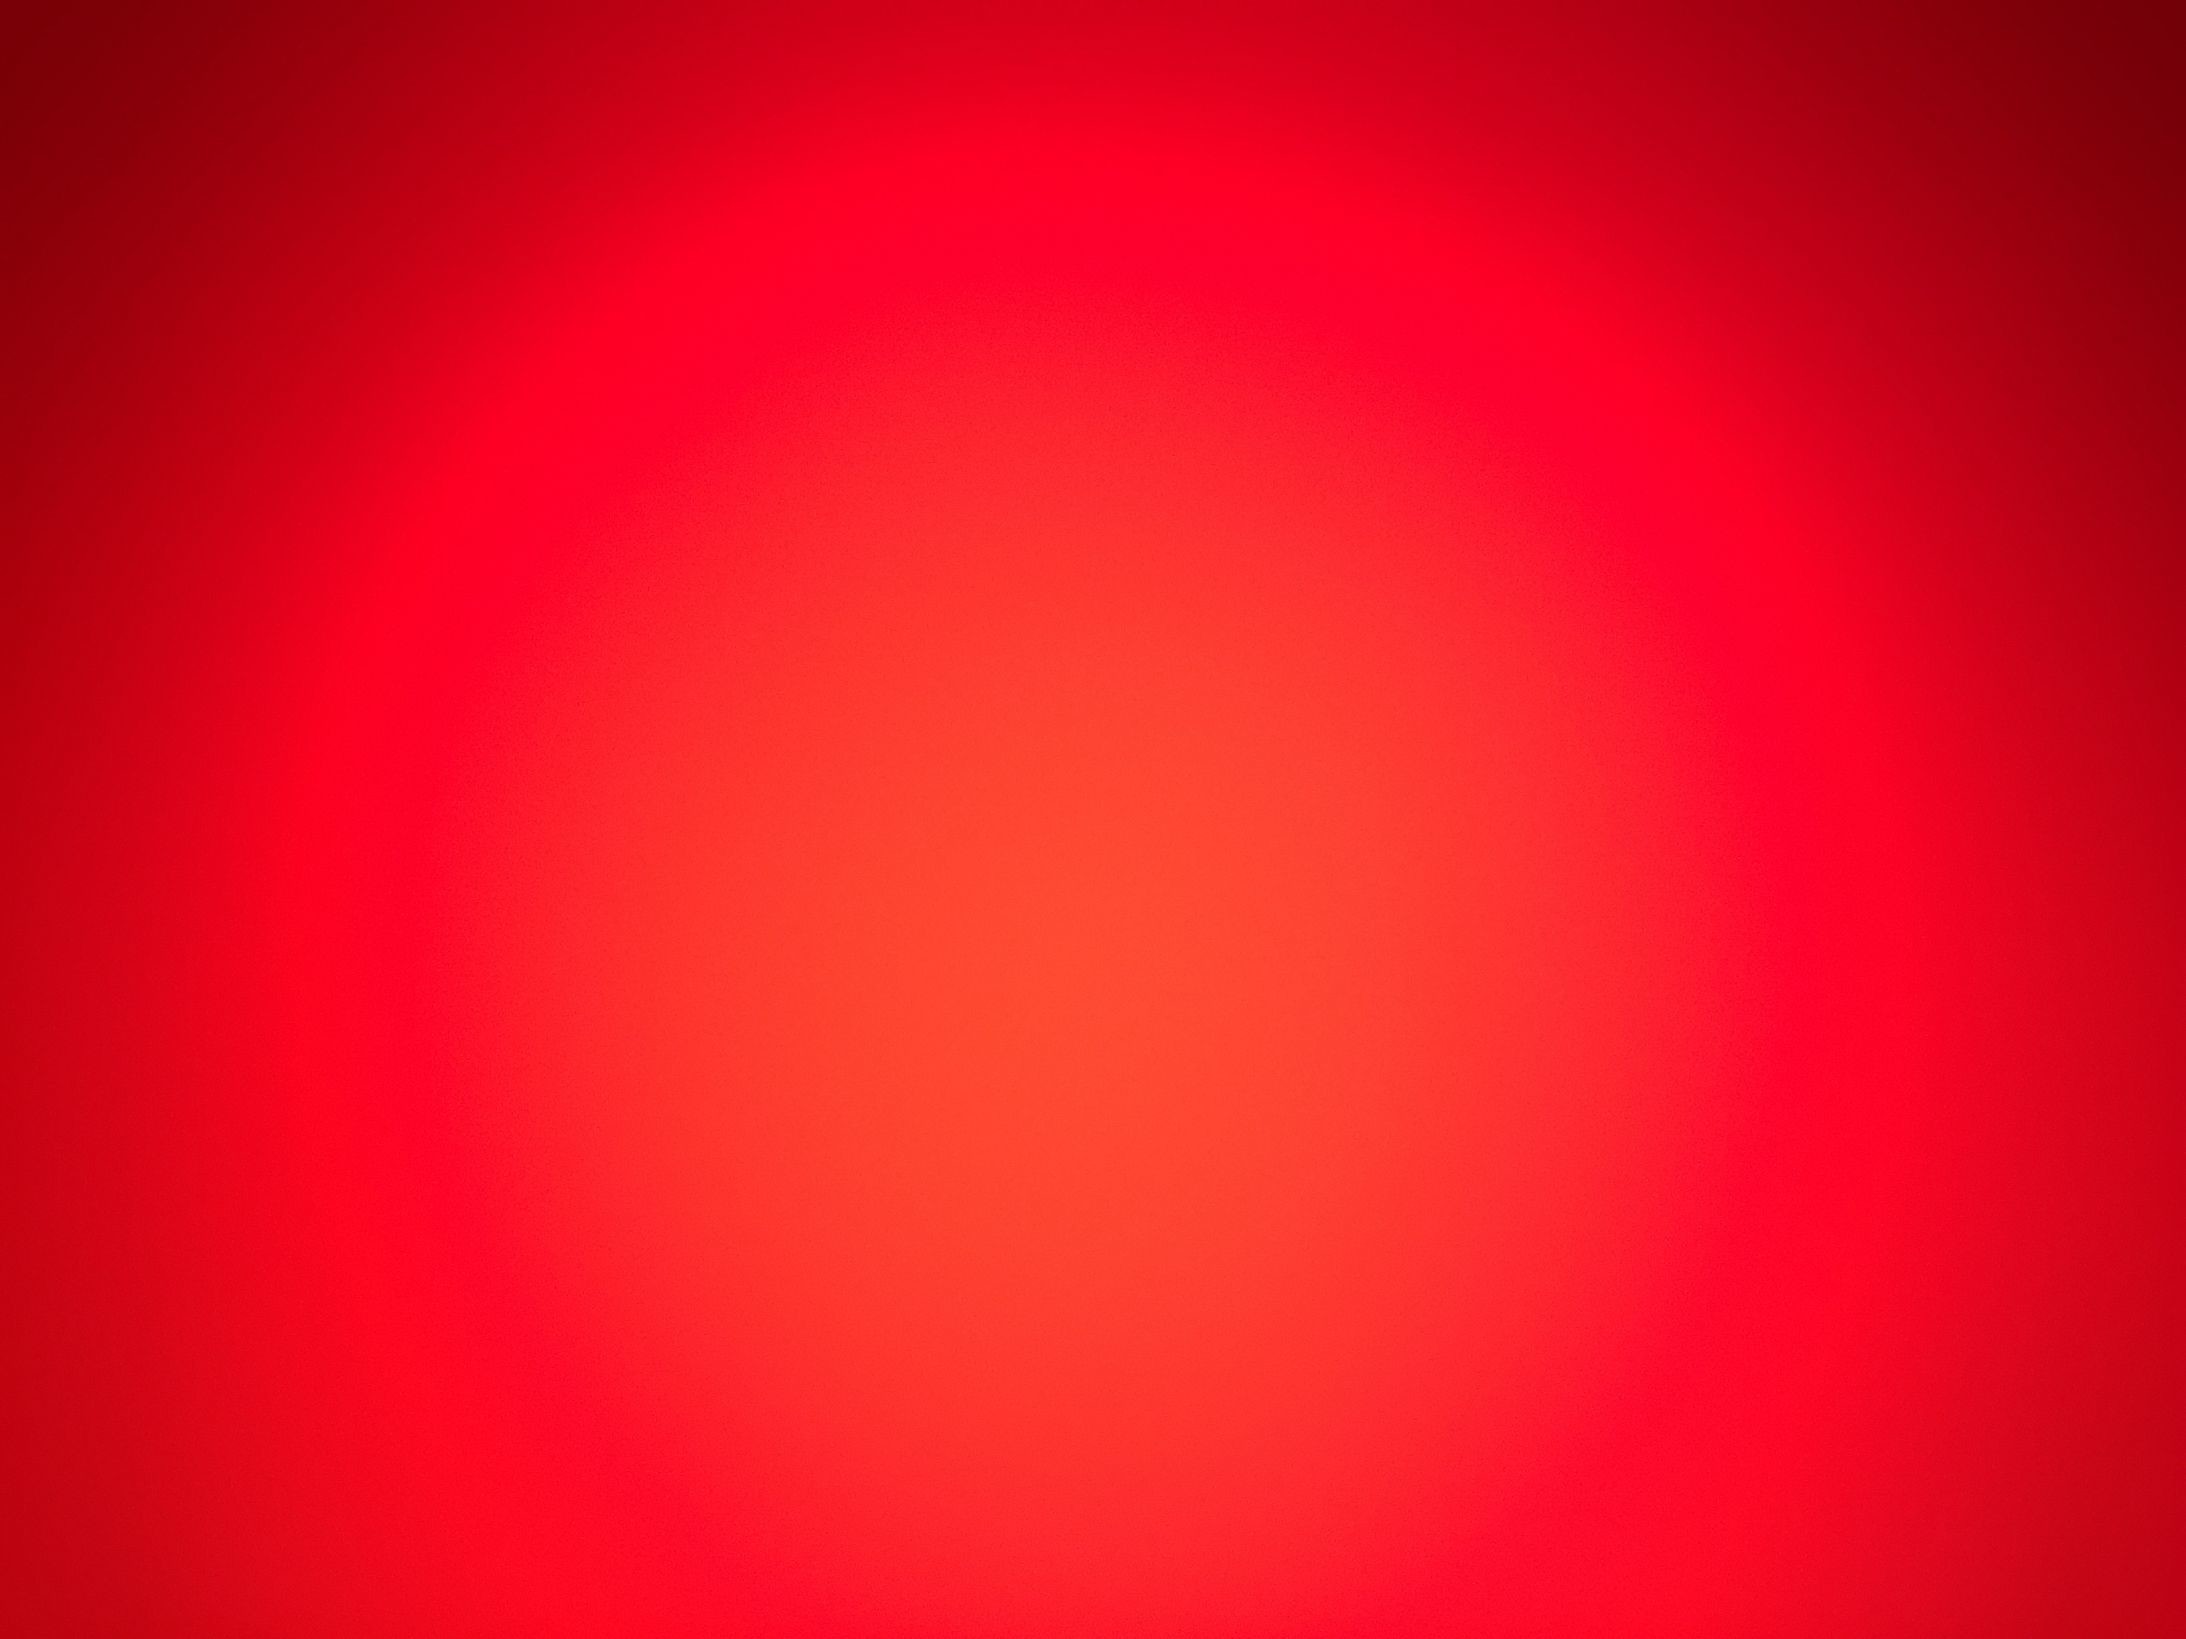 2186x1639 High Quality Red Background Blank Meme Template